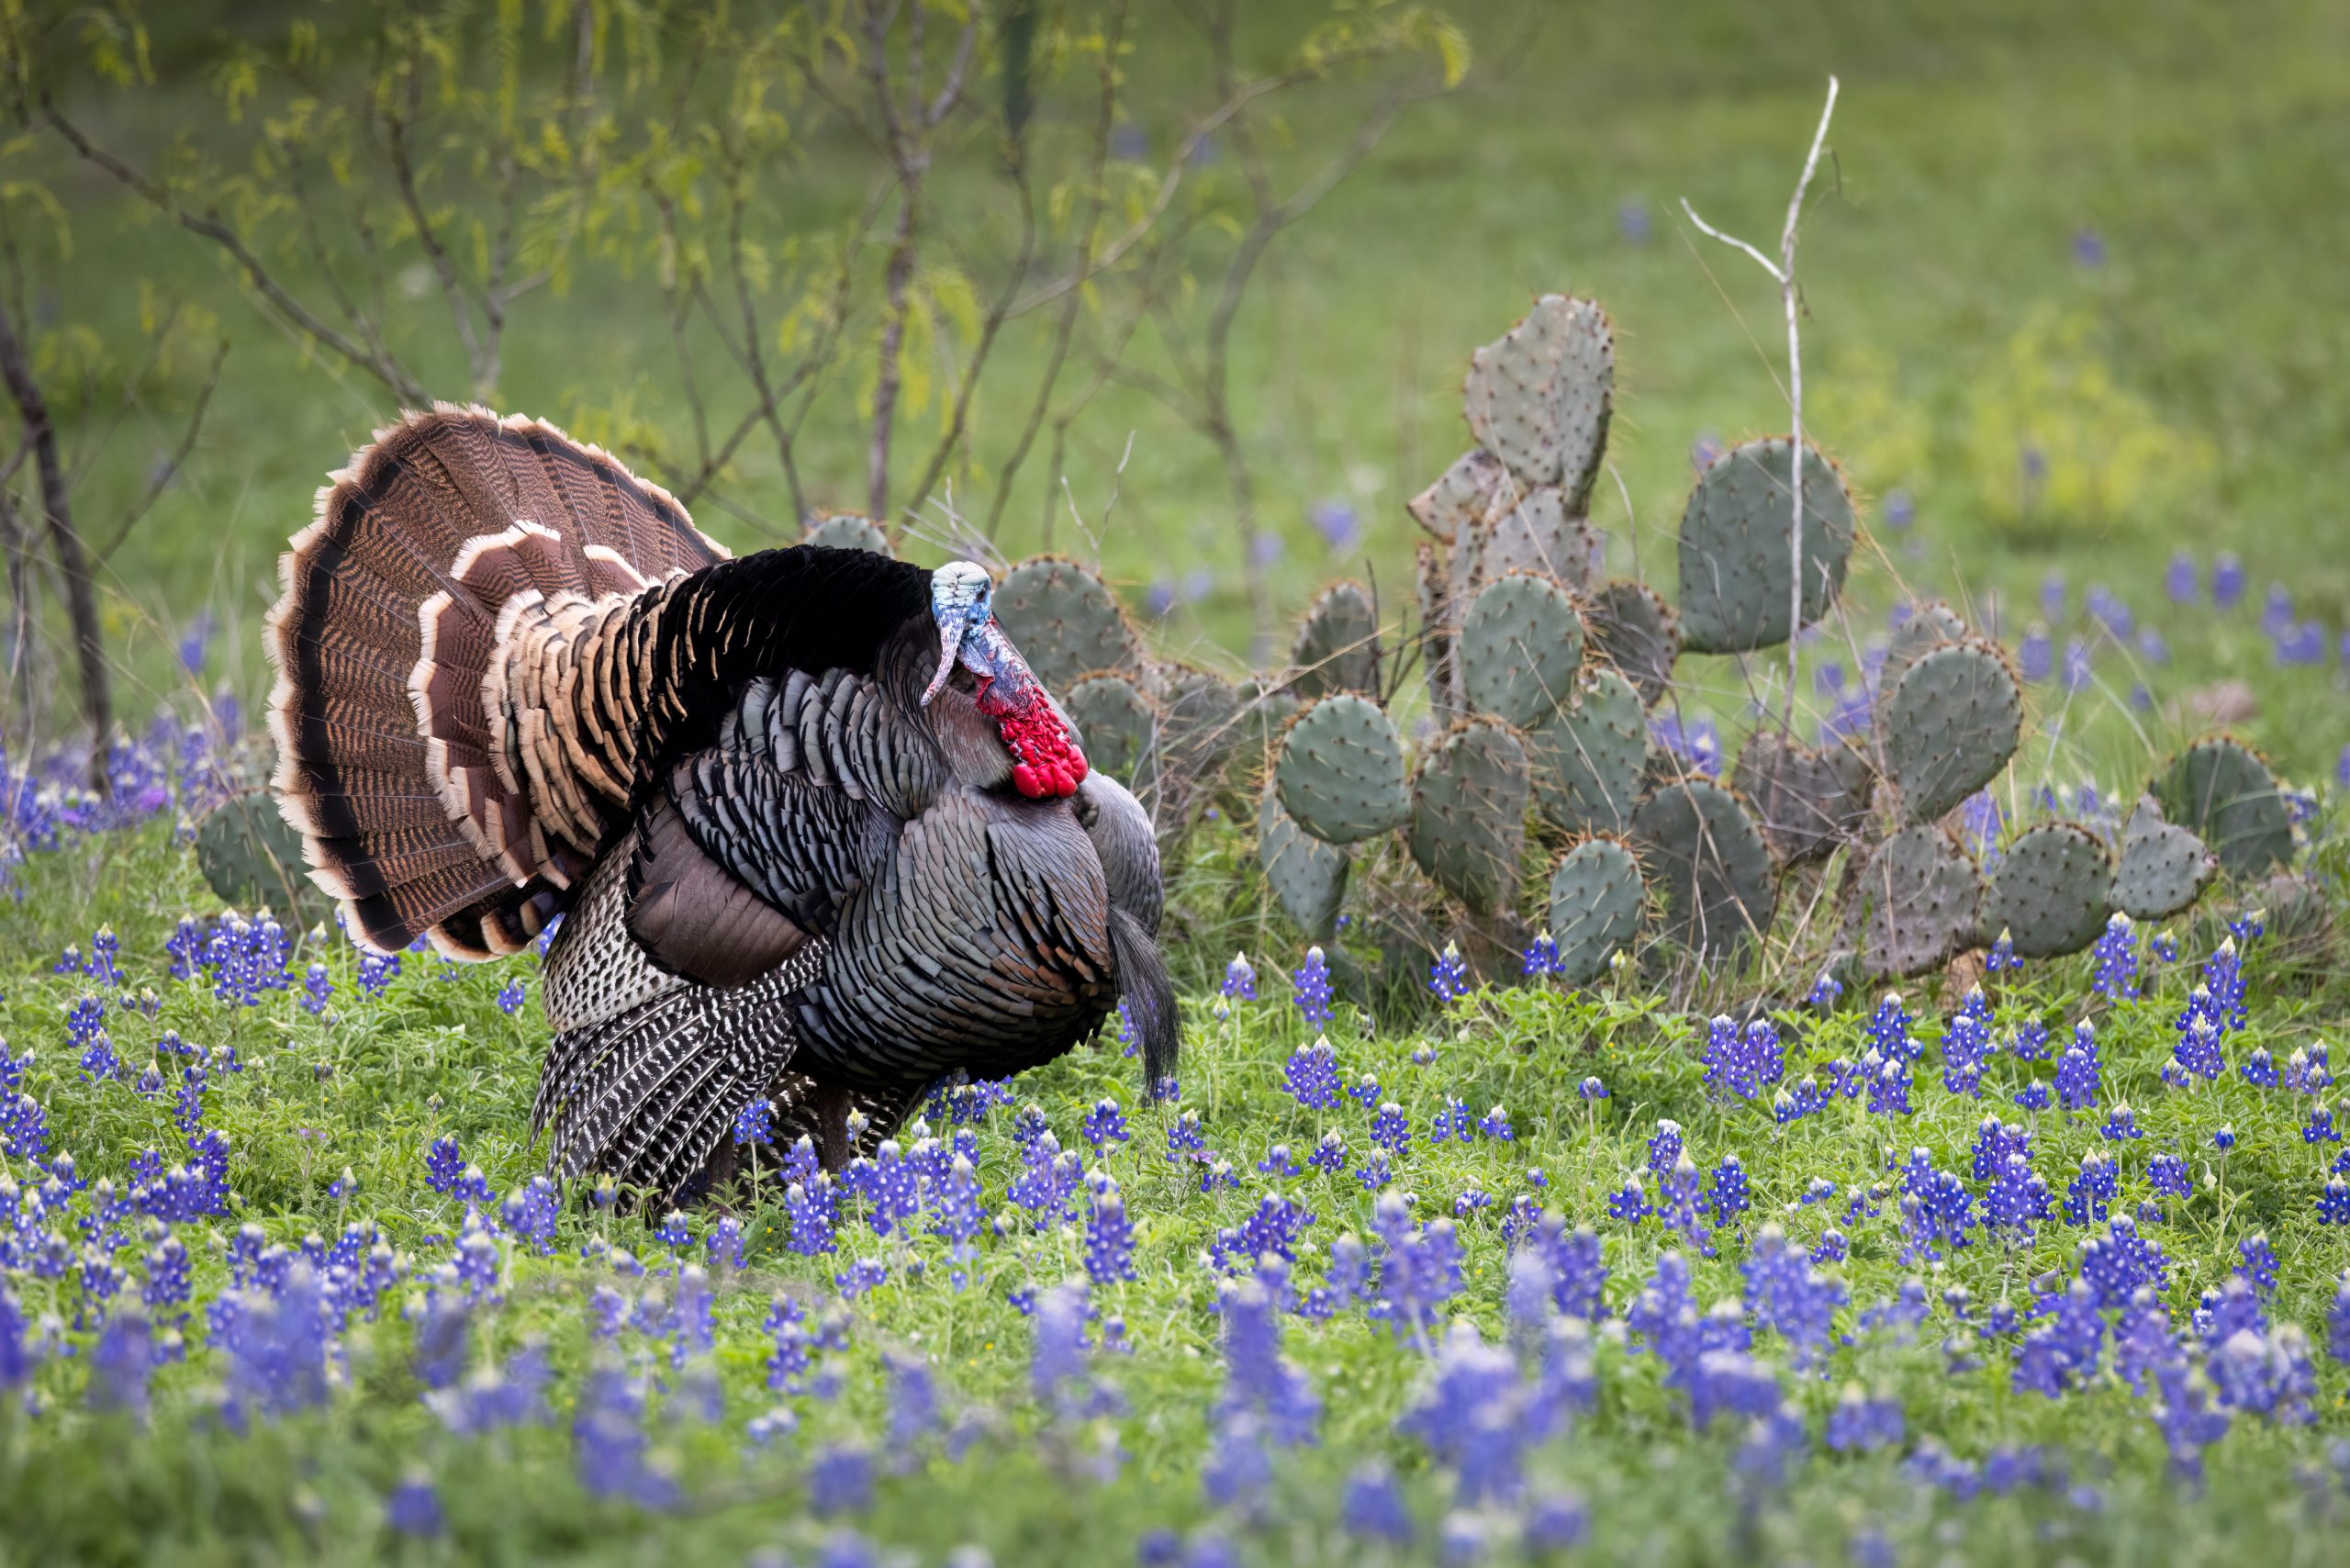 Gobbler strutting in Bluebonnets and Prickly Pear